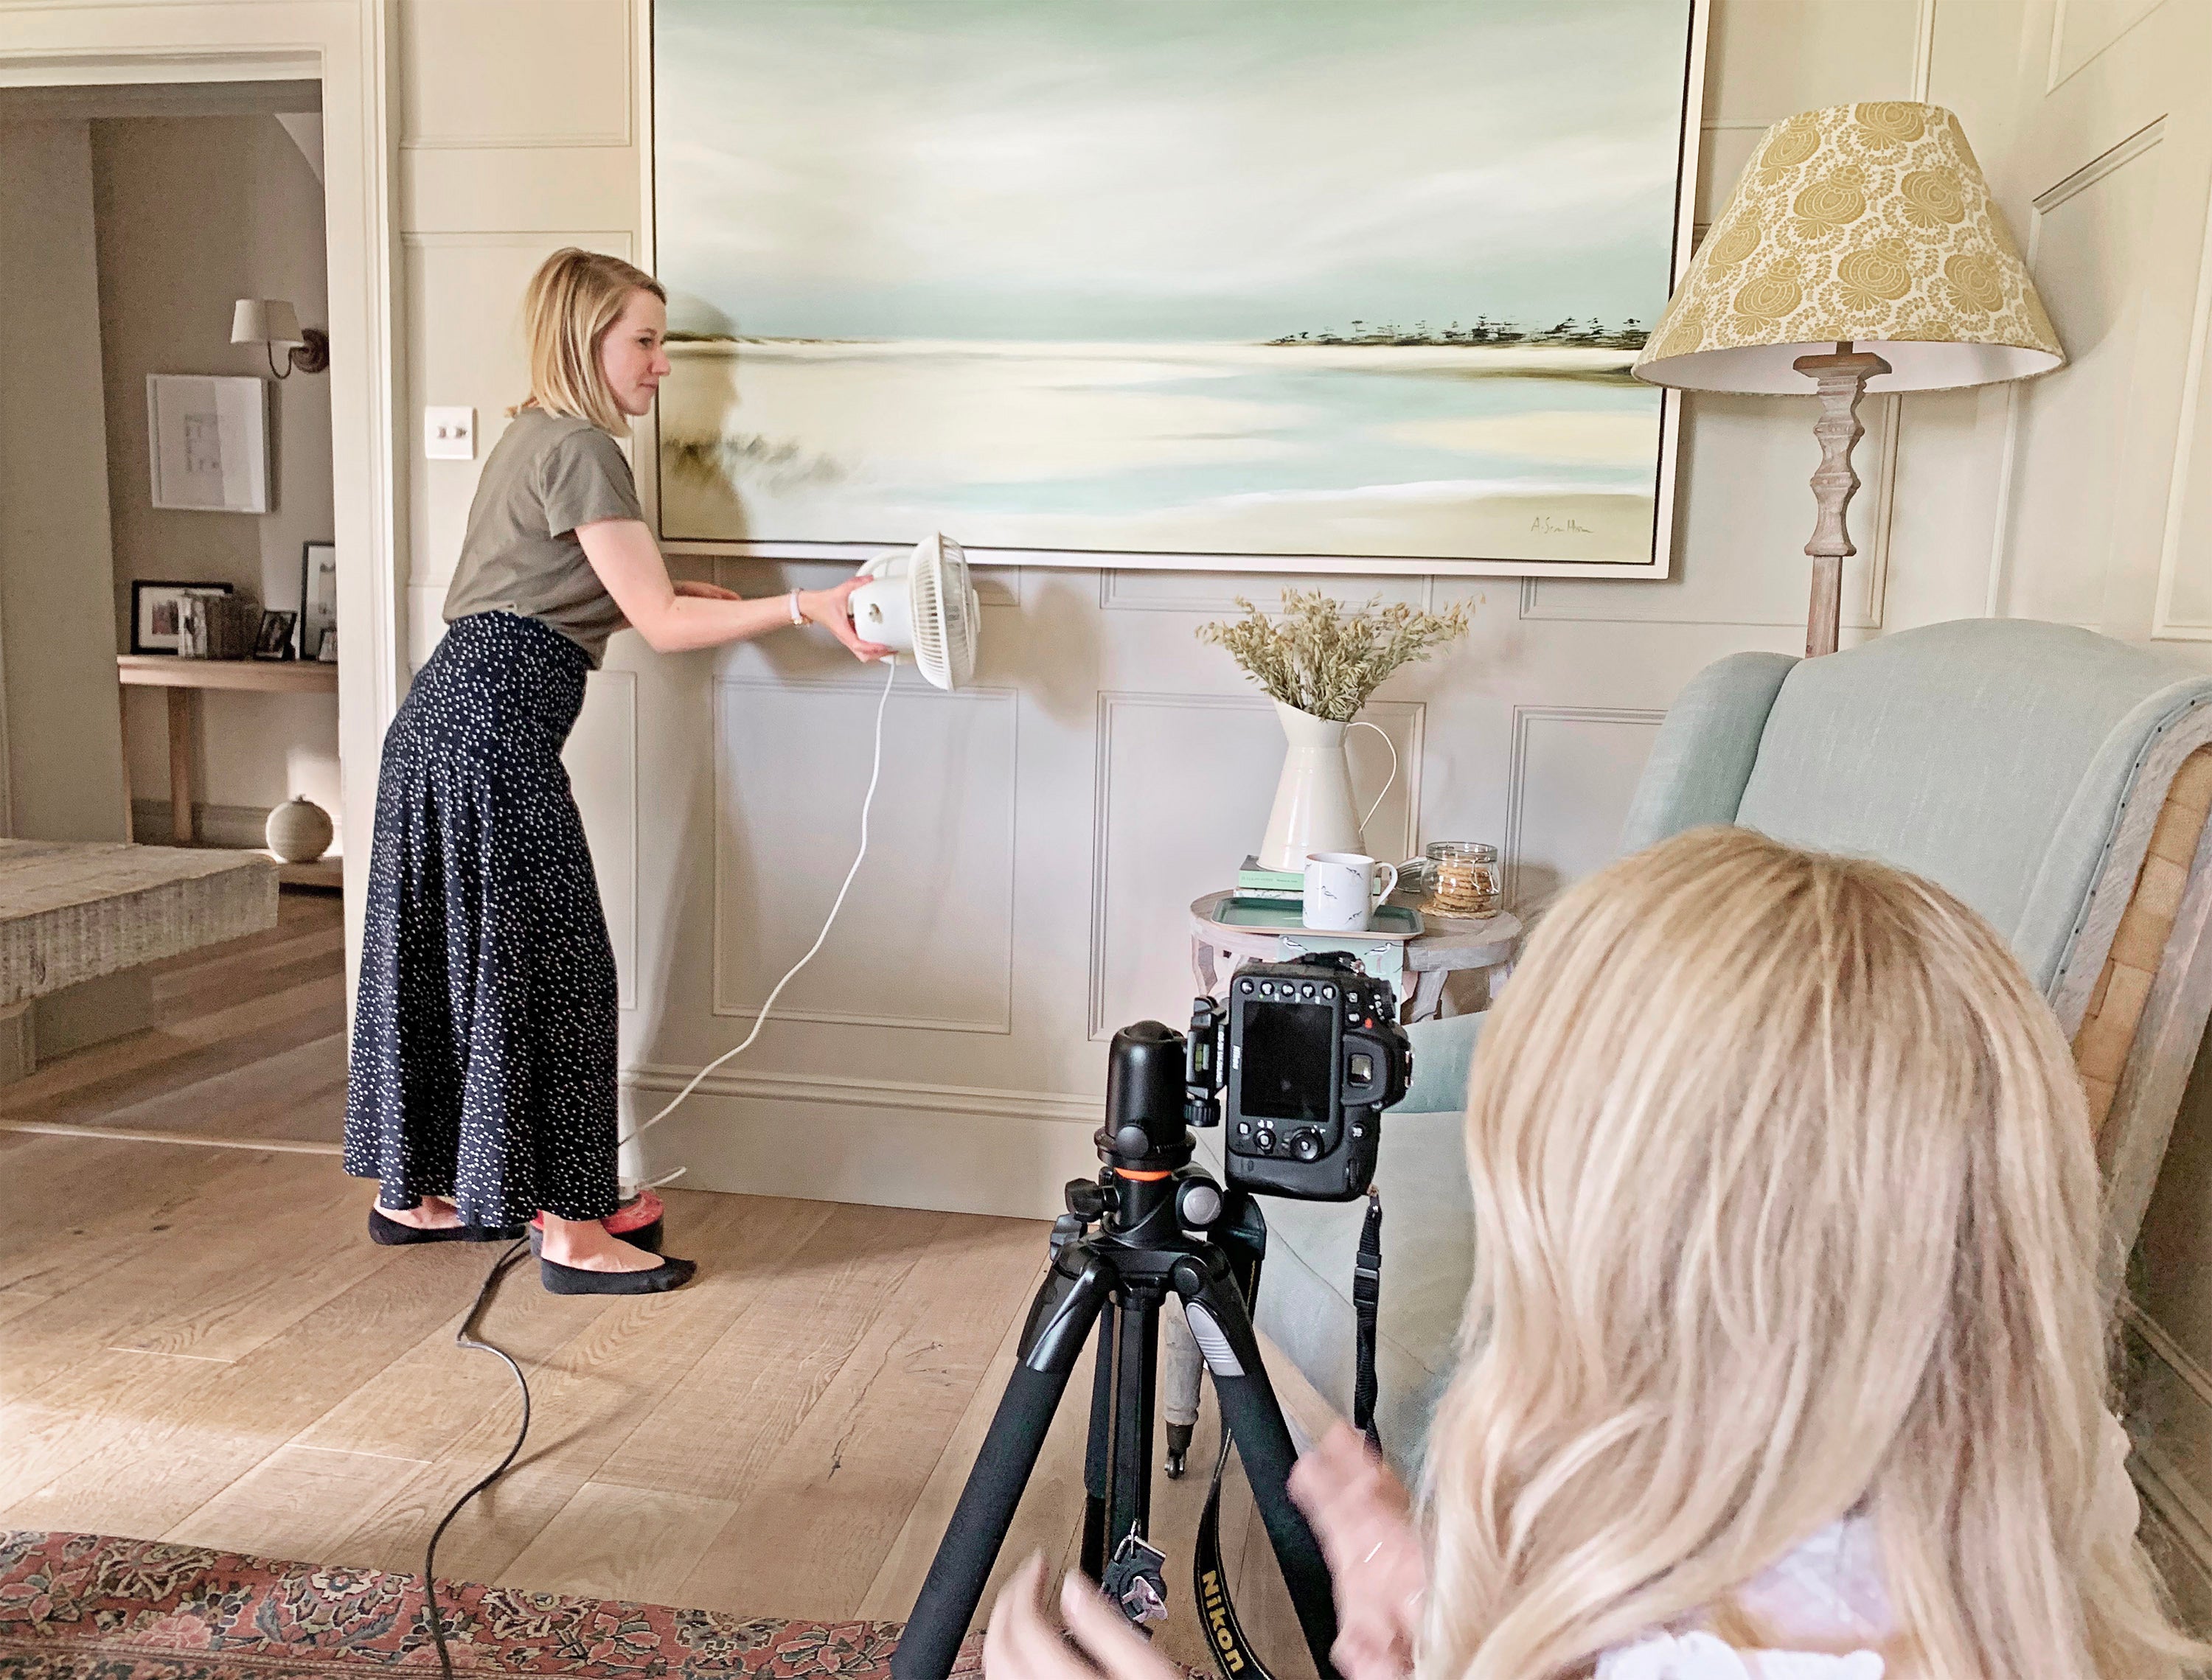 Using Sophie's fan to capture beautiful shots of Sophie's new coastal collection